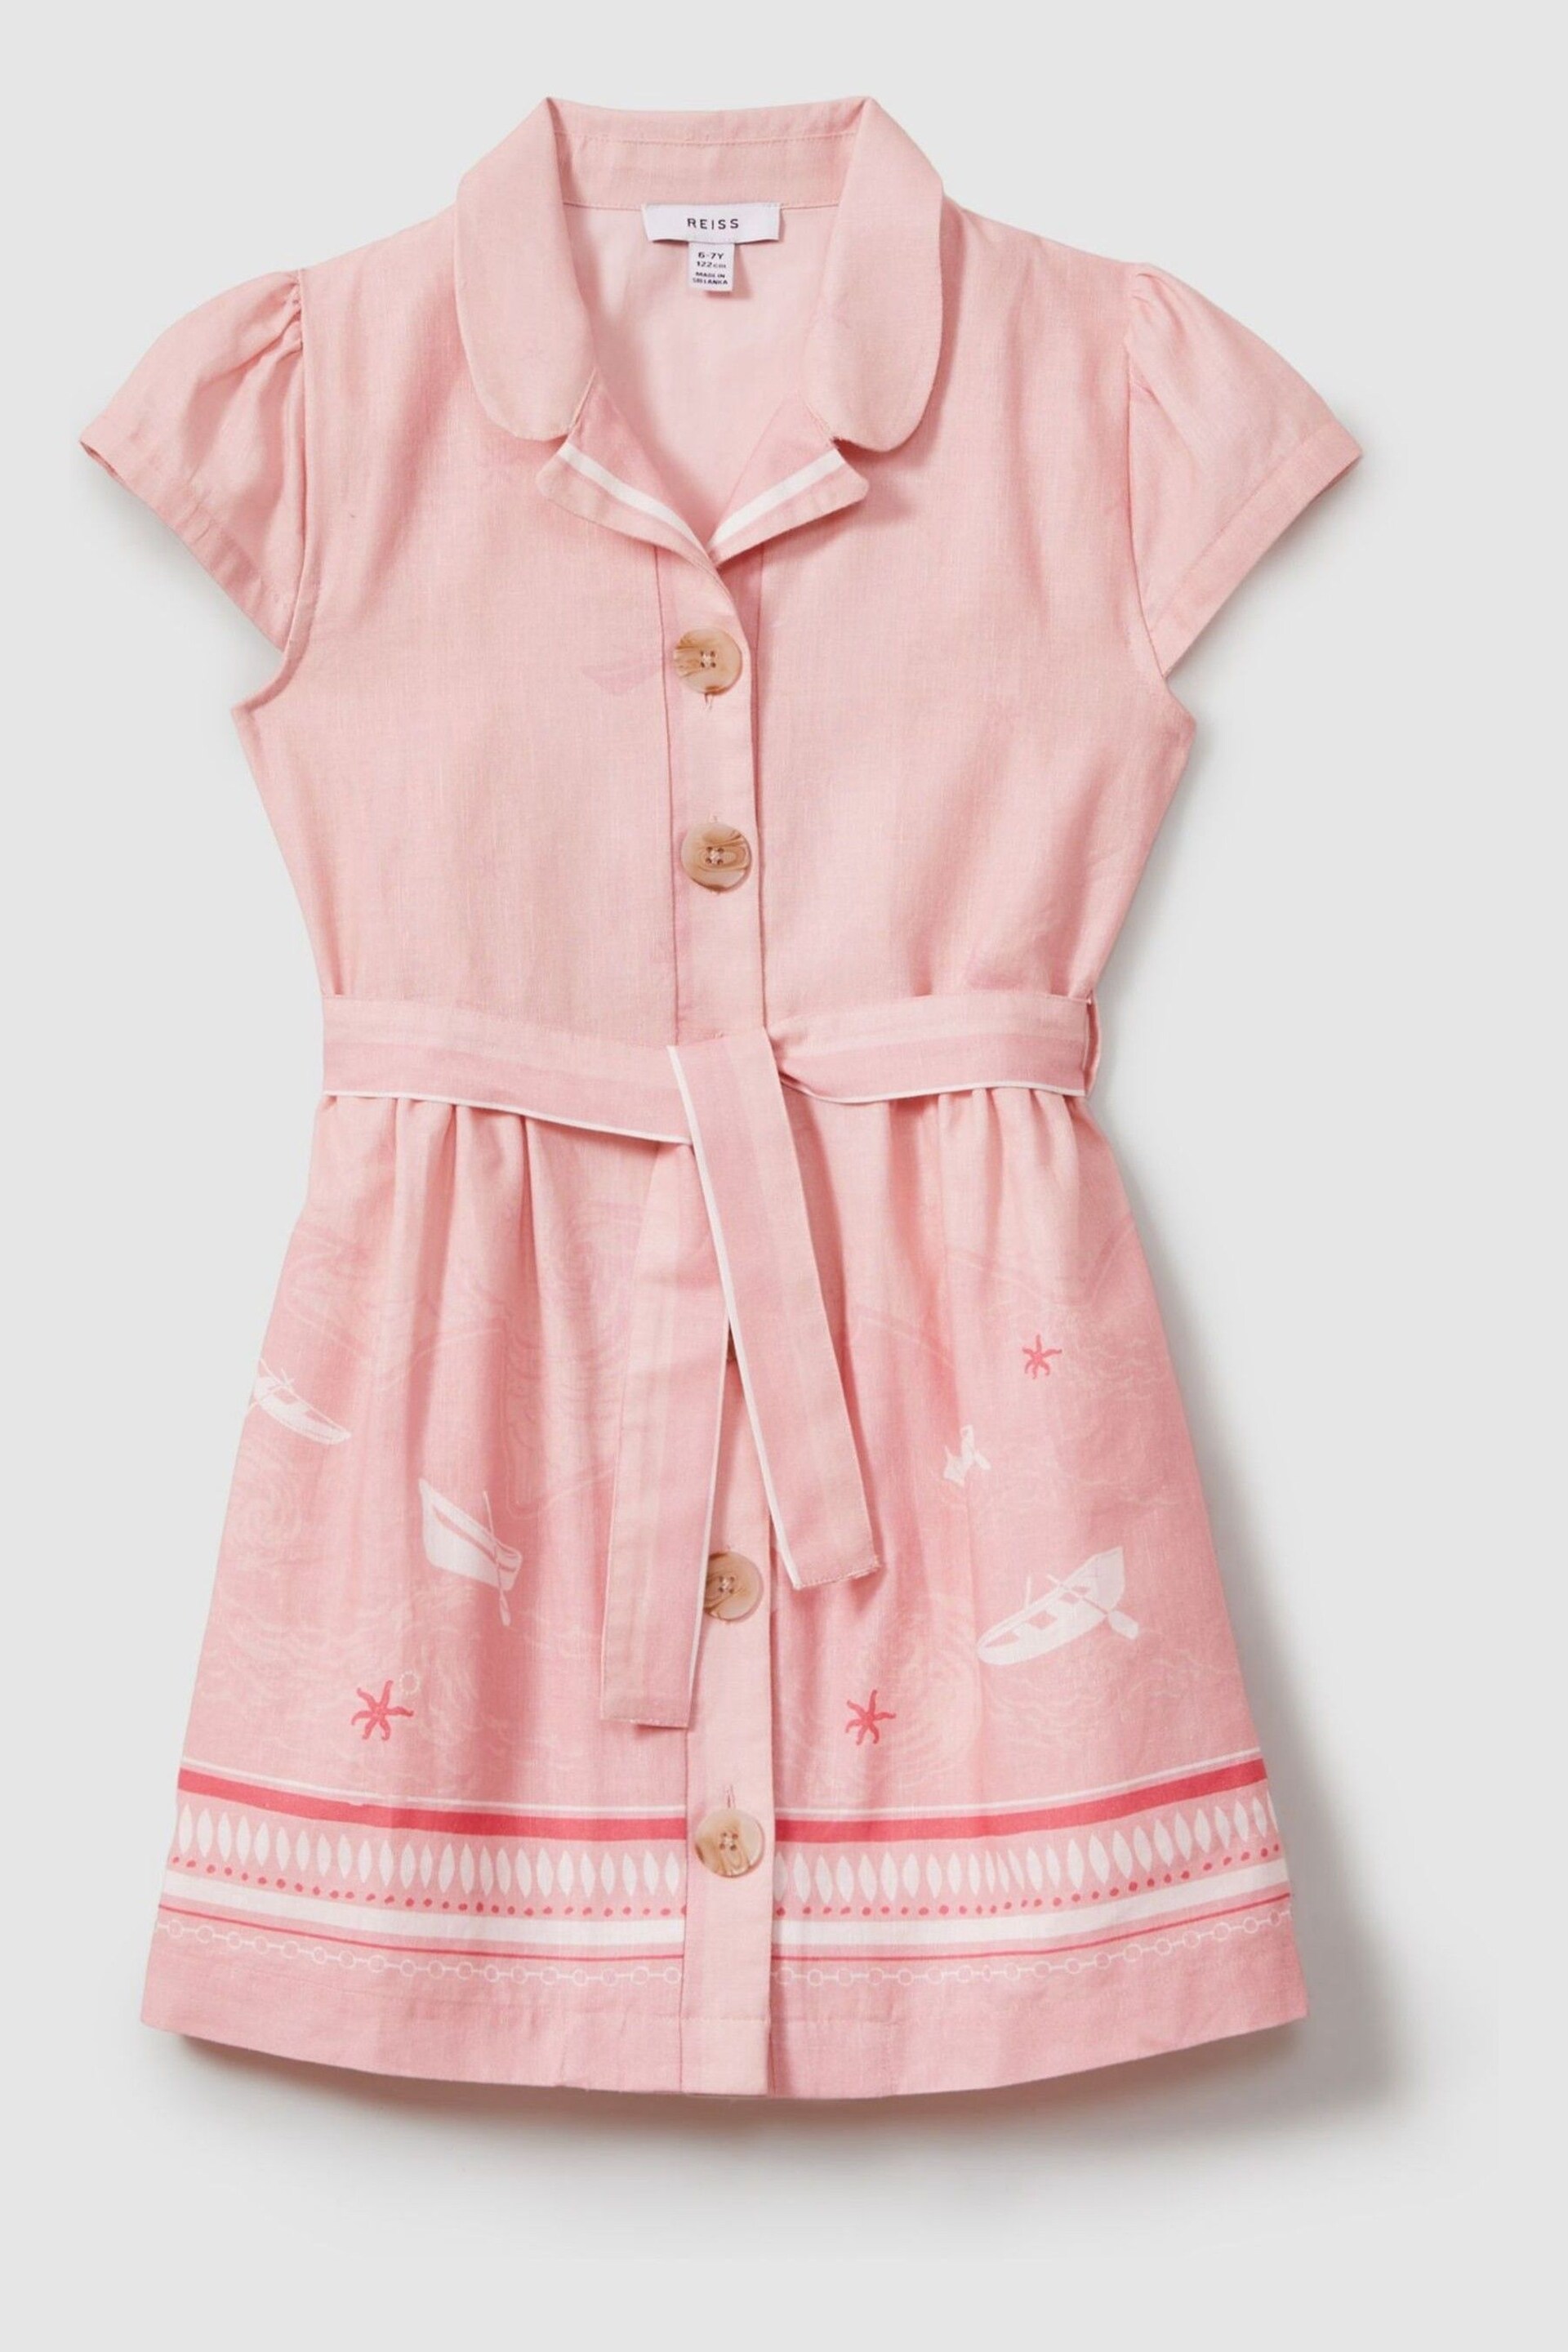 Reiss Pink Print Eliza Teen Cotton Linen Capped Sleeve Belted Dress - Image 1 of 4